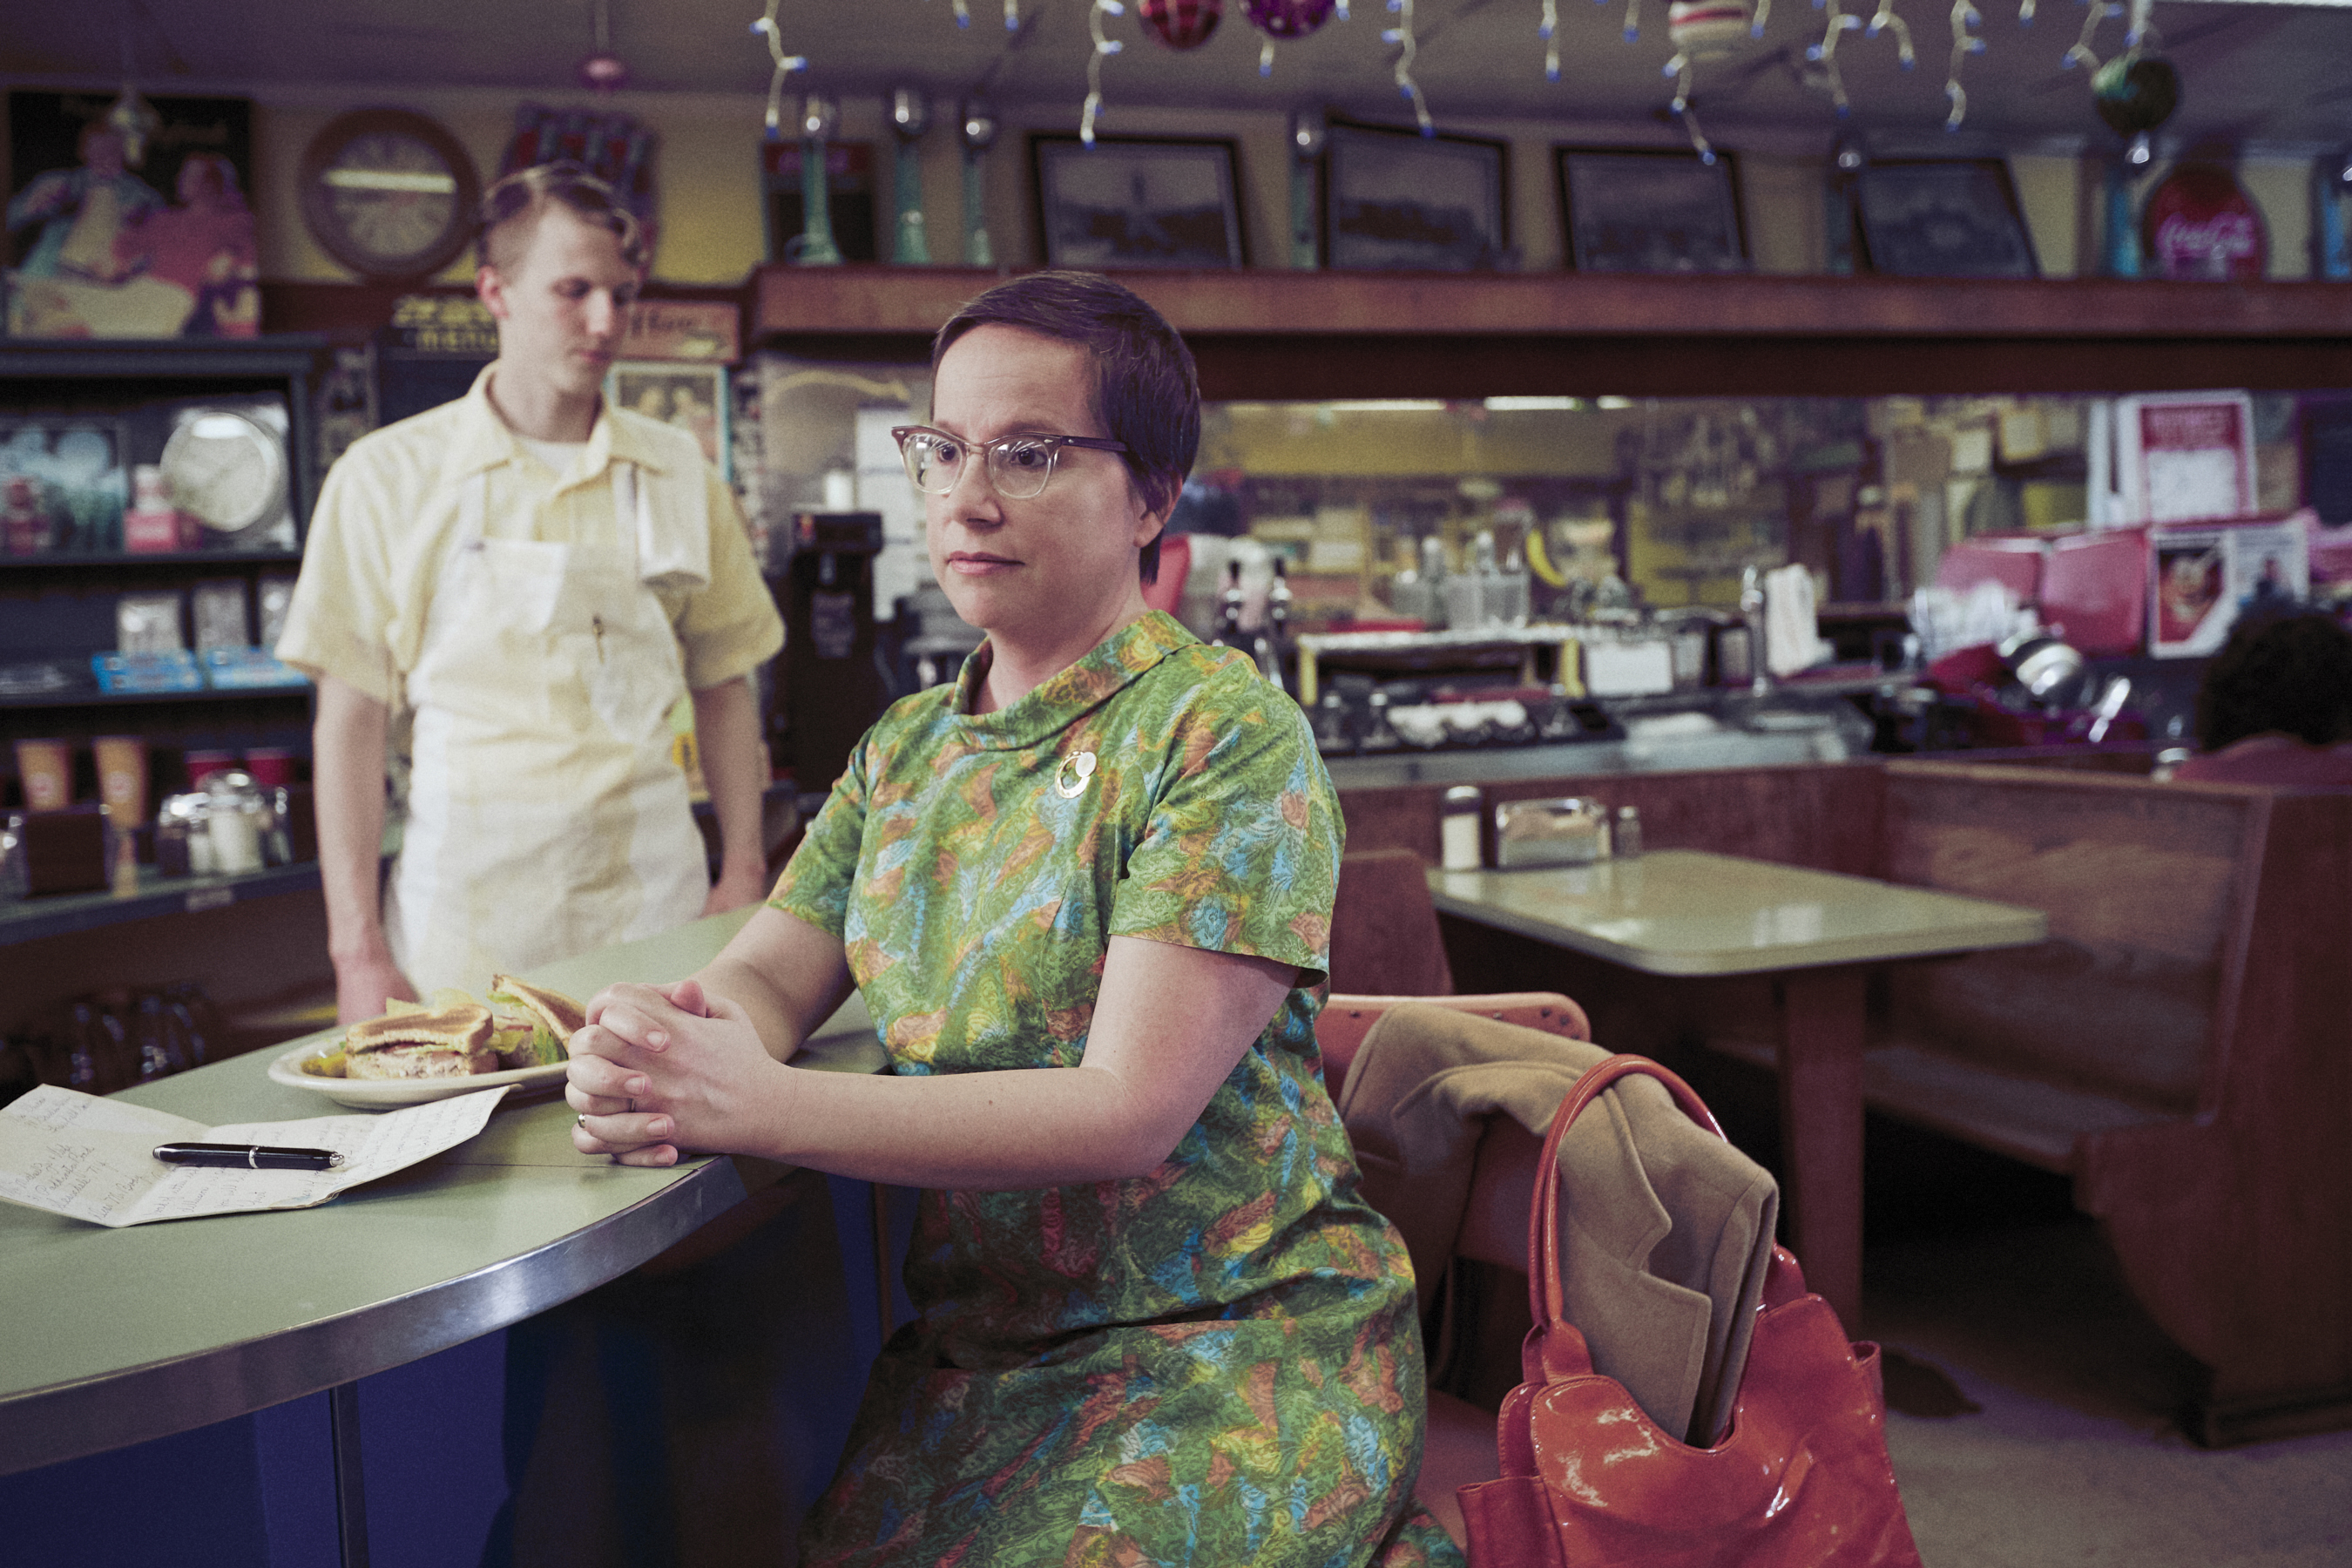 A woman in a green patterned dress and glasses sitting at a restaurant counter with a restaurant worker behind it.